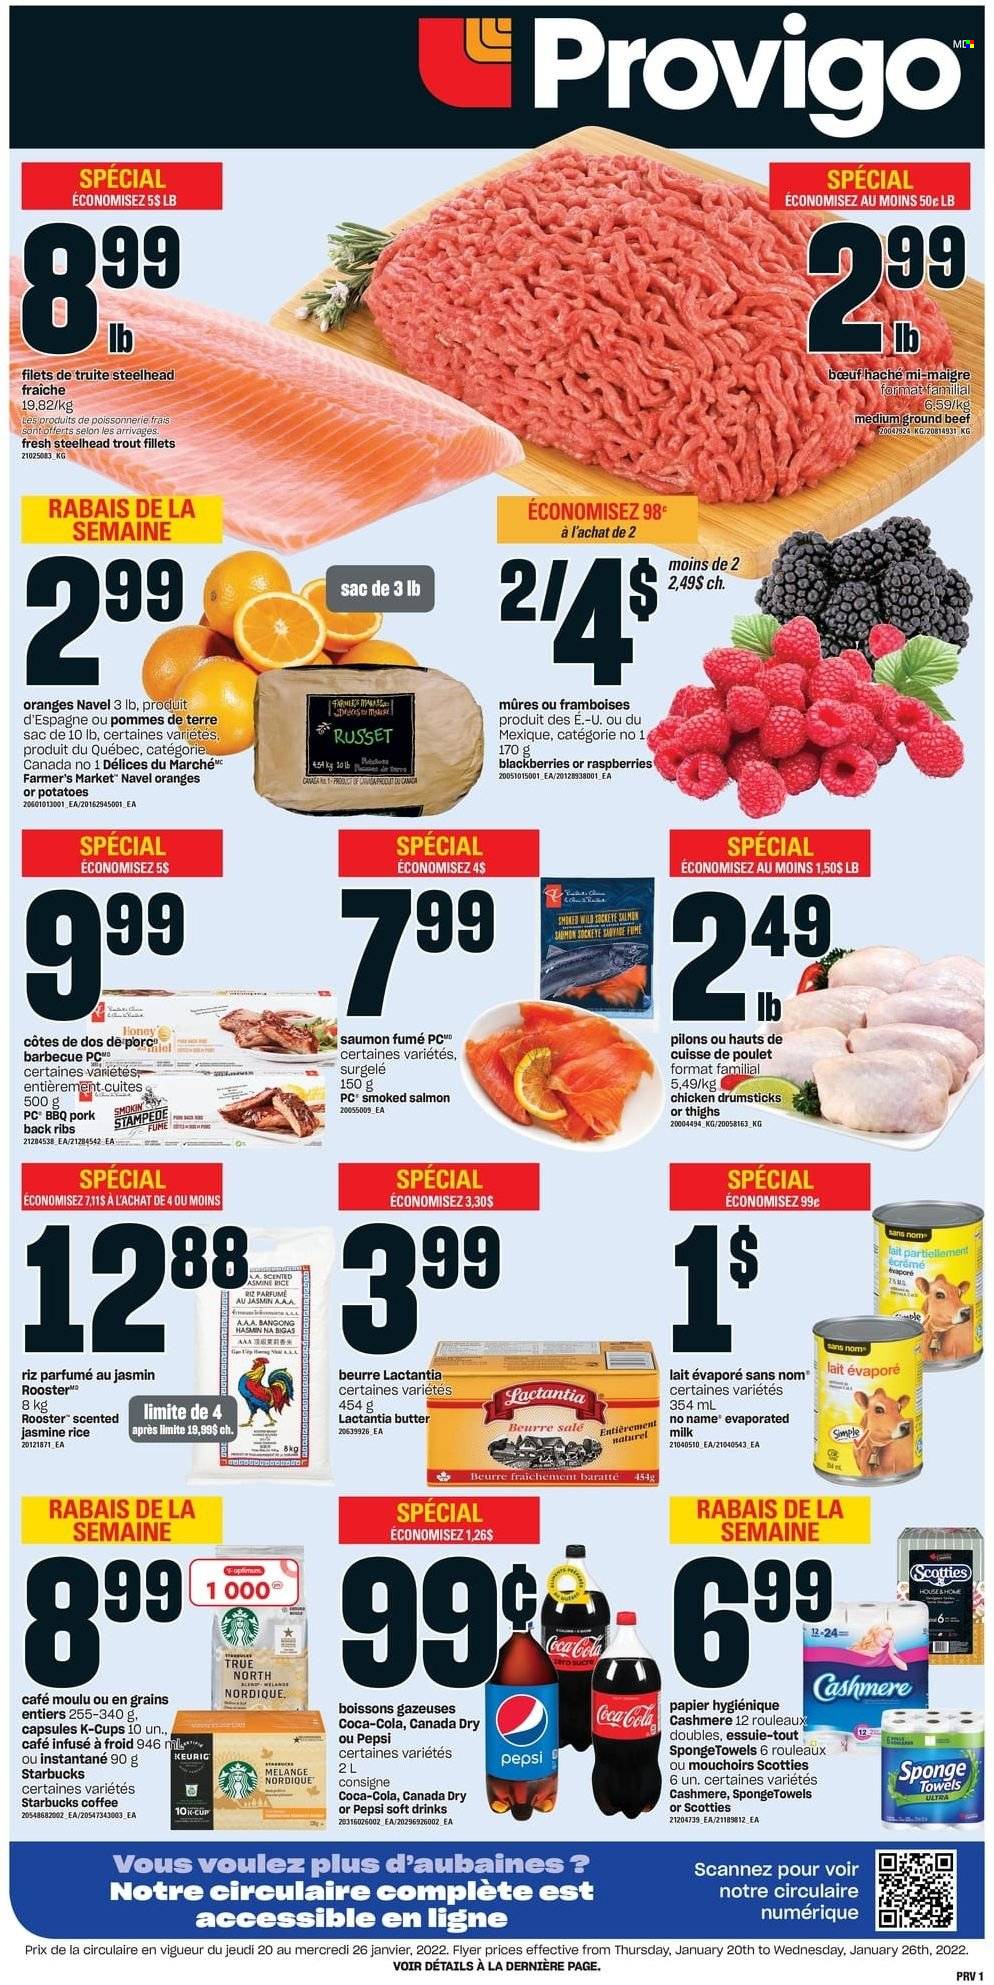 thumbnail - Provigo Flyer - January 20, 2022 - January 26, 2022 - Sales products - russet potatoes, potatoes, blackberries, navel oranges, salmon, smoked salmon, trout, No Name, evaporated milk, butter, rice, jasmine rice, honey, Canada Dry, Coca-Cola, Pepsi, soft drink, coffee, coffee capsules, Starbucks, K-Cups, chicken drumsticks, chicken, beef meat, ground beef, pork meat, pork ribs, pork back ribs, oranges. Page 1.